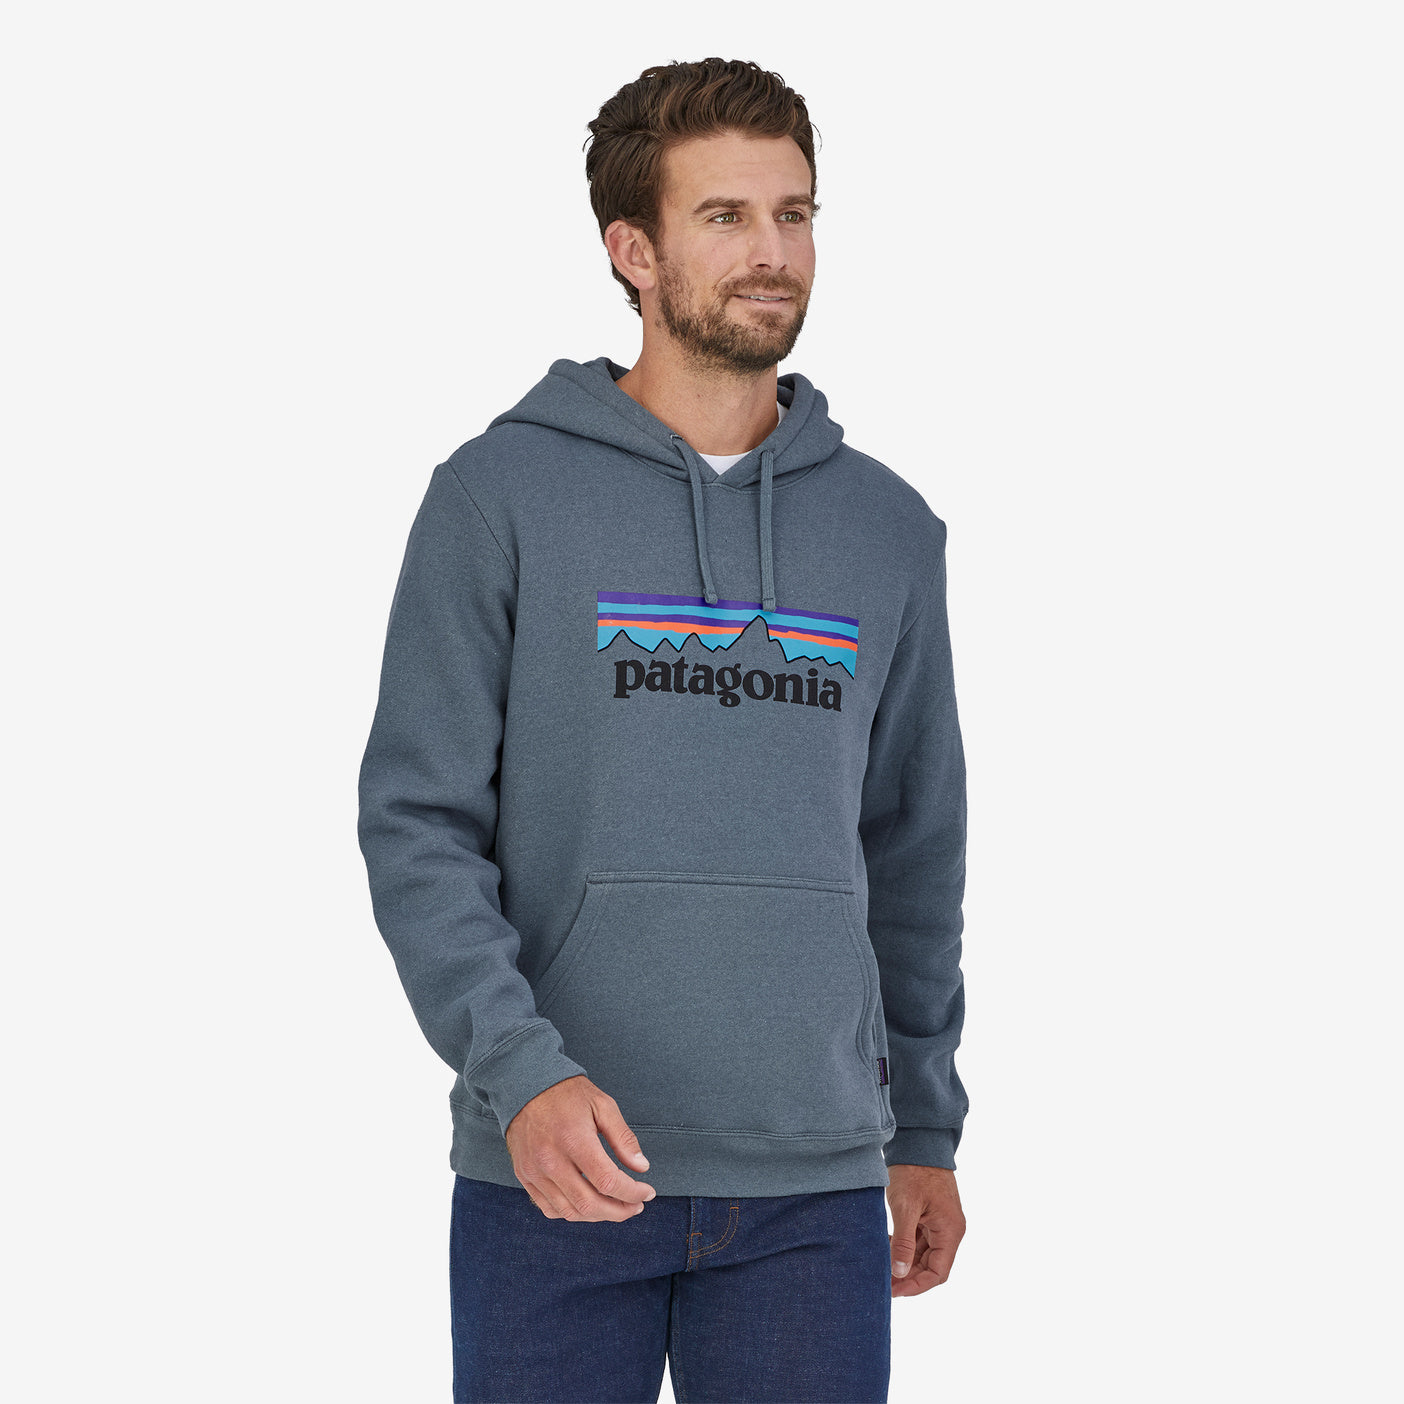 A classic graphic on a hoody sweatshirt made with recycled fabrics. By utilizing fabric scraps and recycled bottles this 100% recycled garment reduces our reliance on virgin materials. Fair Trade Certified™ sewn.